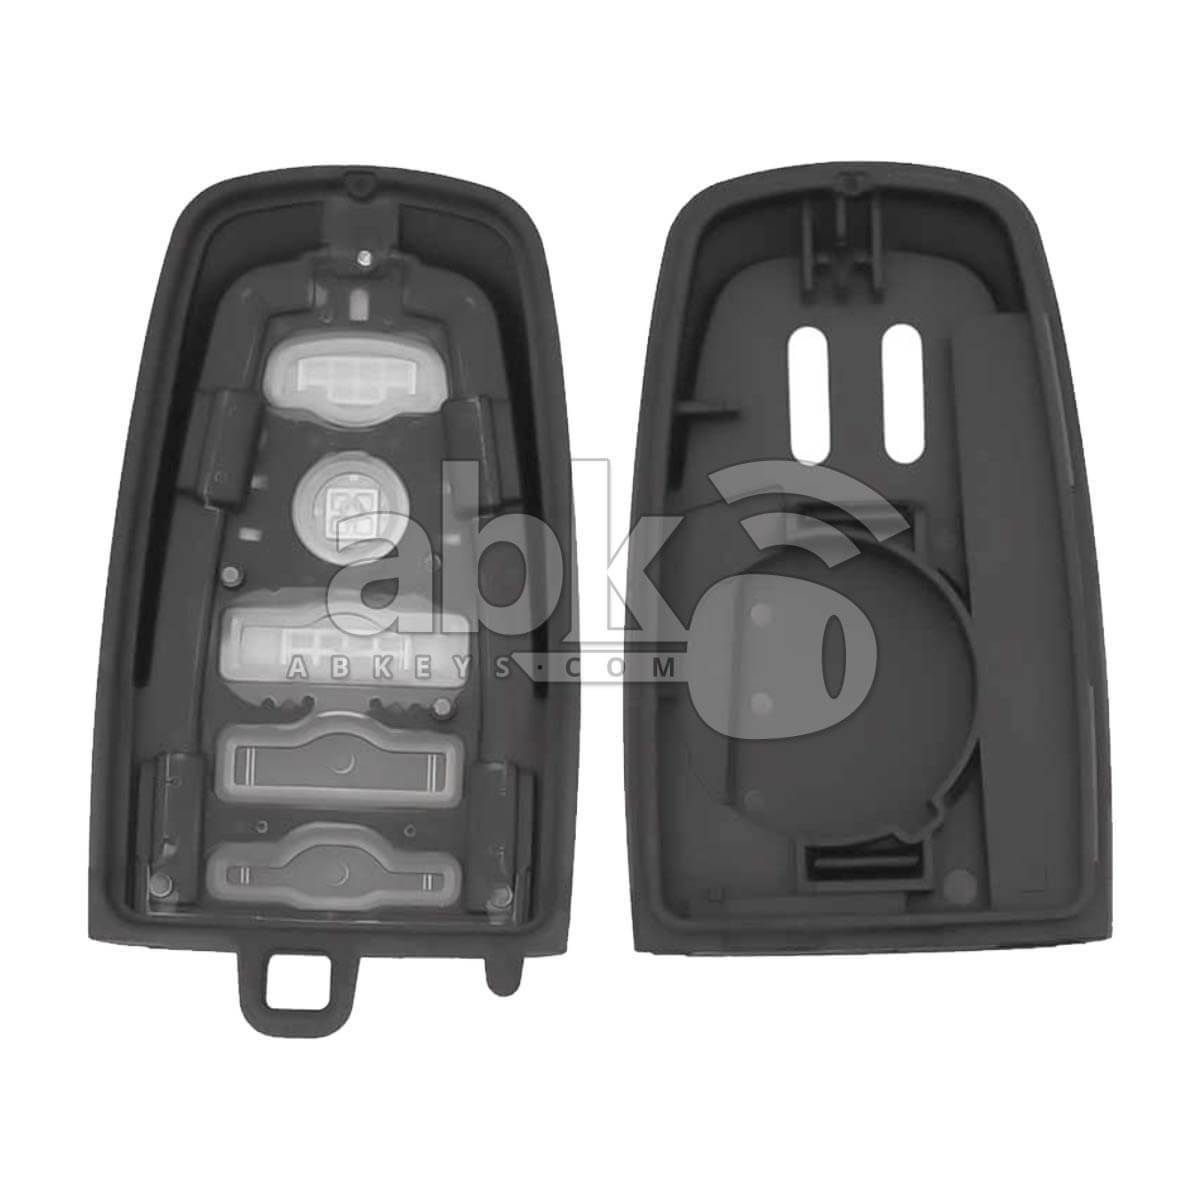 Ford 2017+ Smart Key Cover 5Buttons - ABK-1729 - ABKEYS.COM